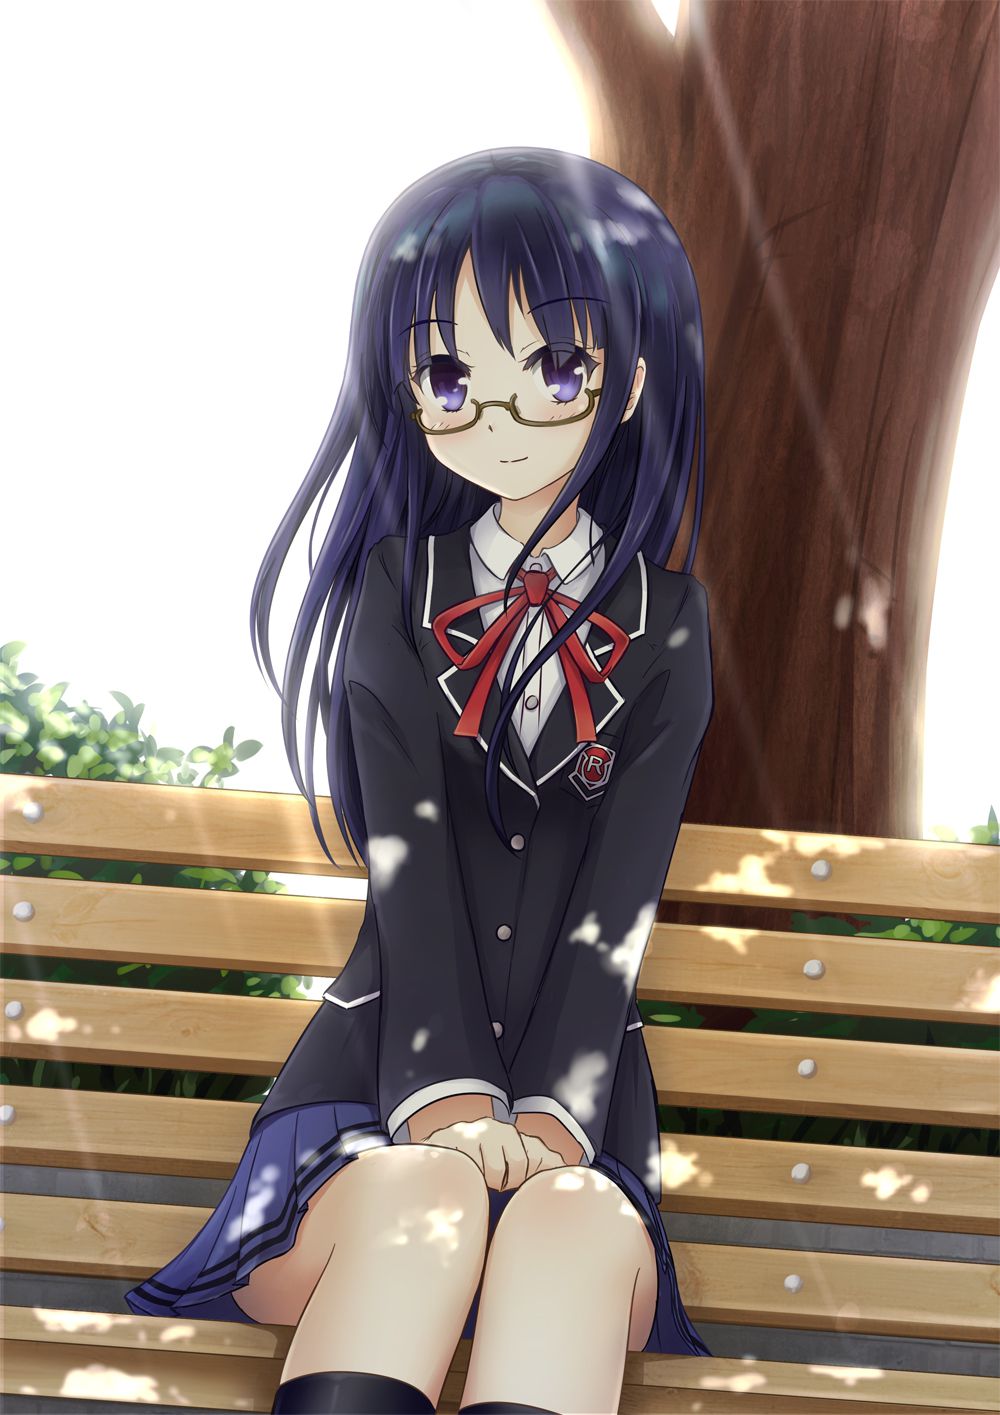 [Secondary] glasses girl Hooray! [Images] part 4 34